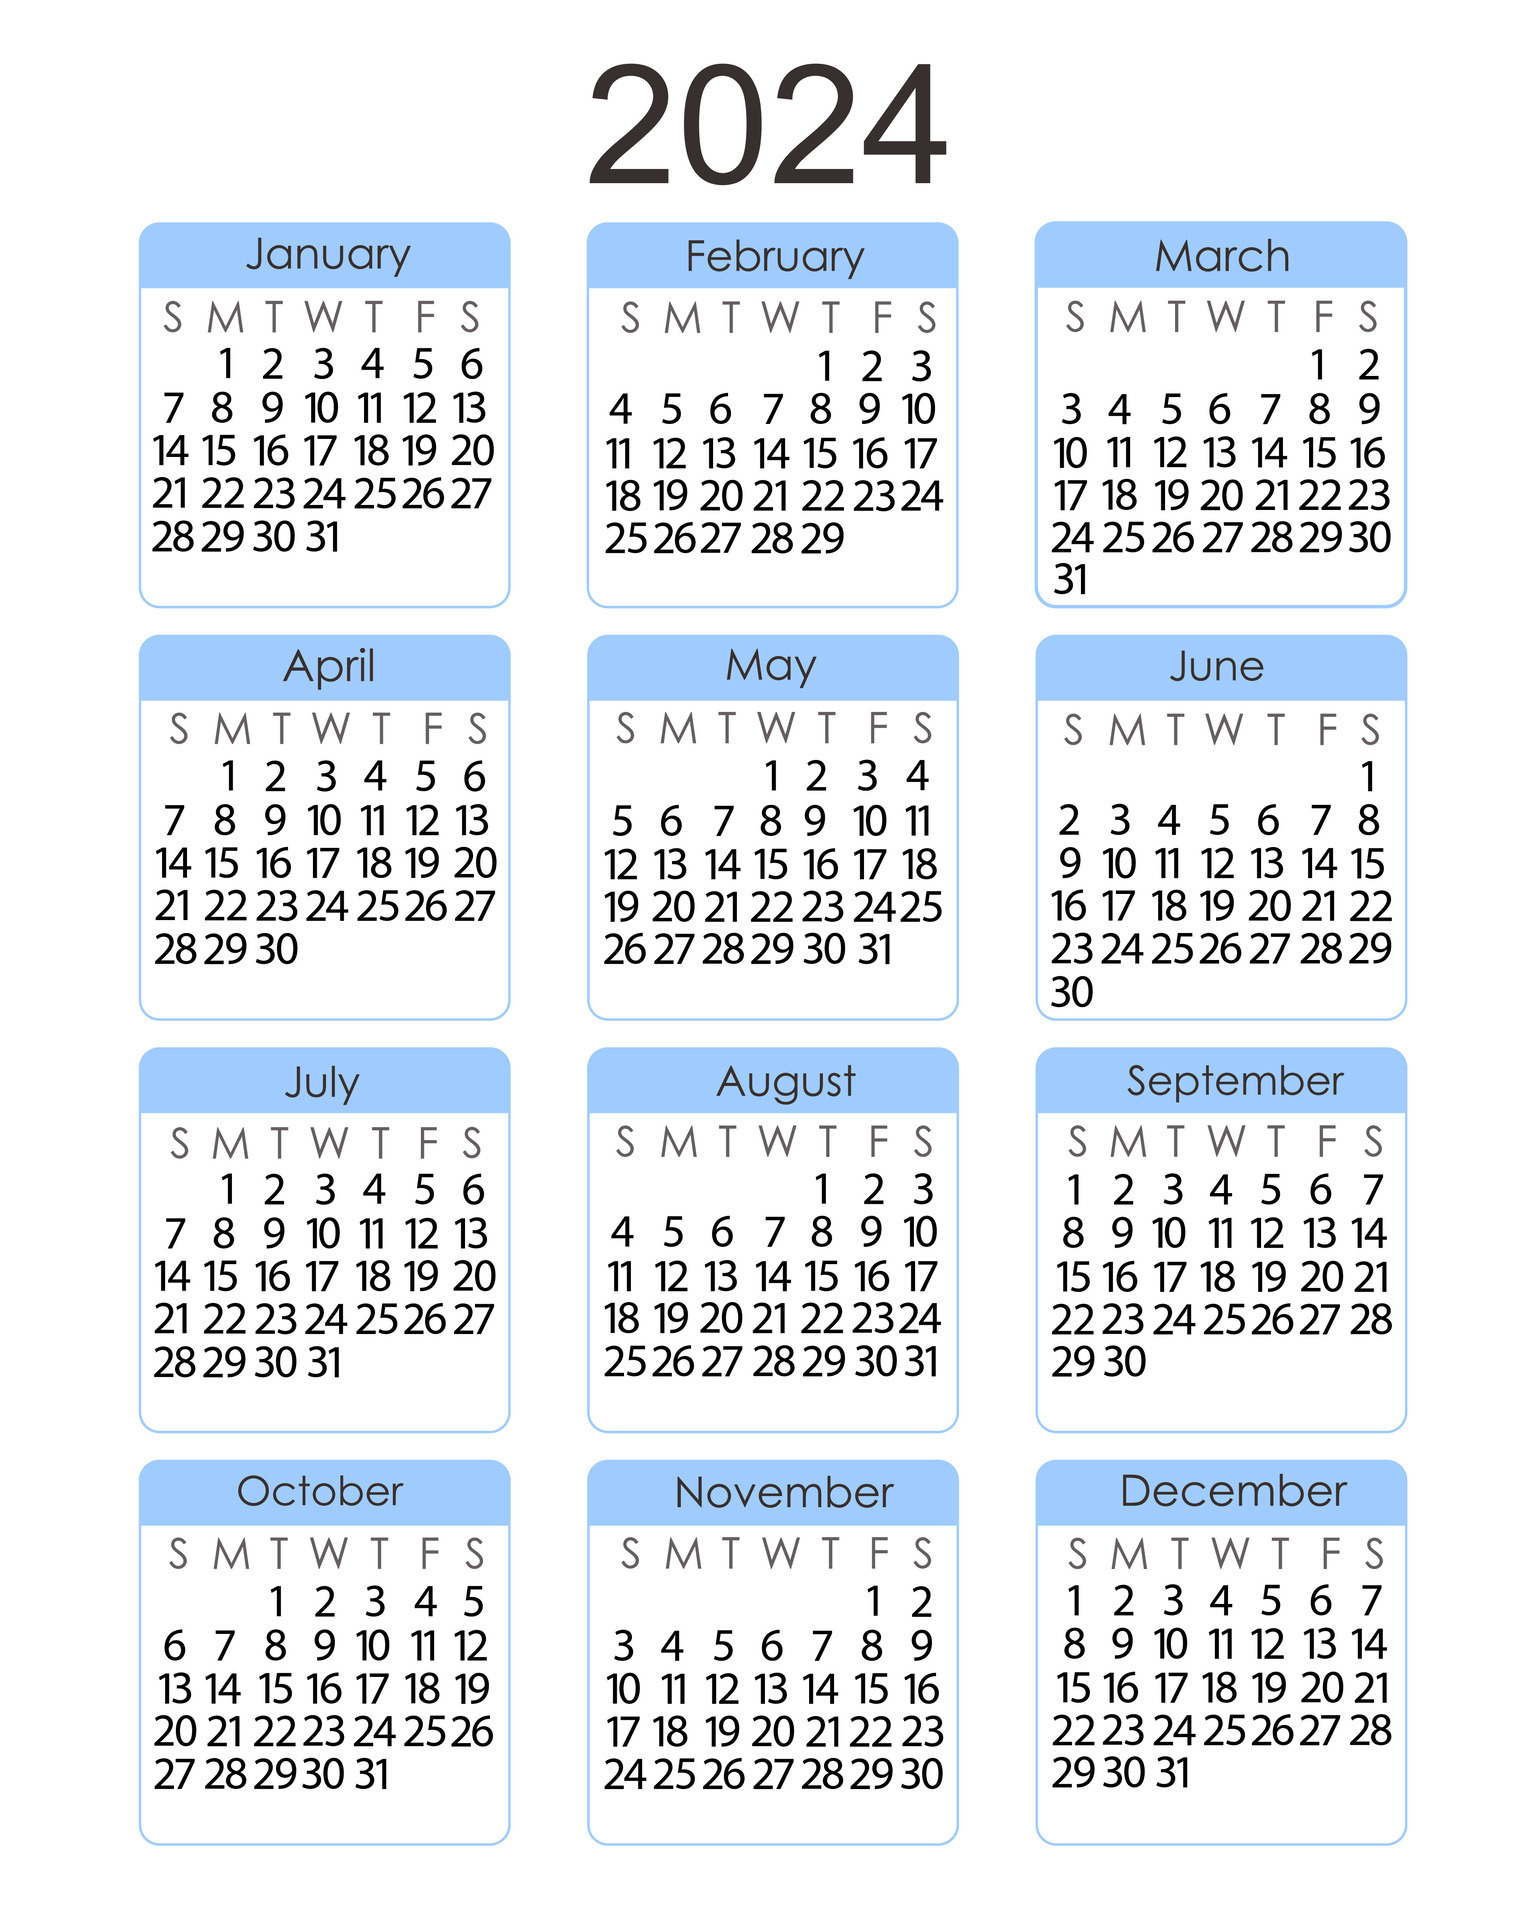 Calendar Template For The Year 2024 In Simple Minimalist Style | Free Printable Calendar 2024 Portrait